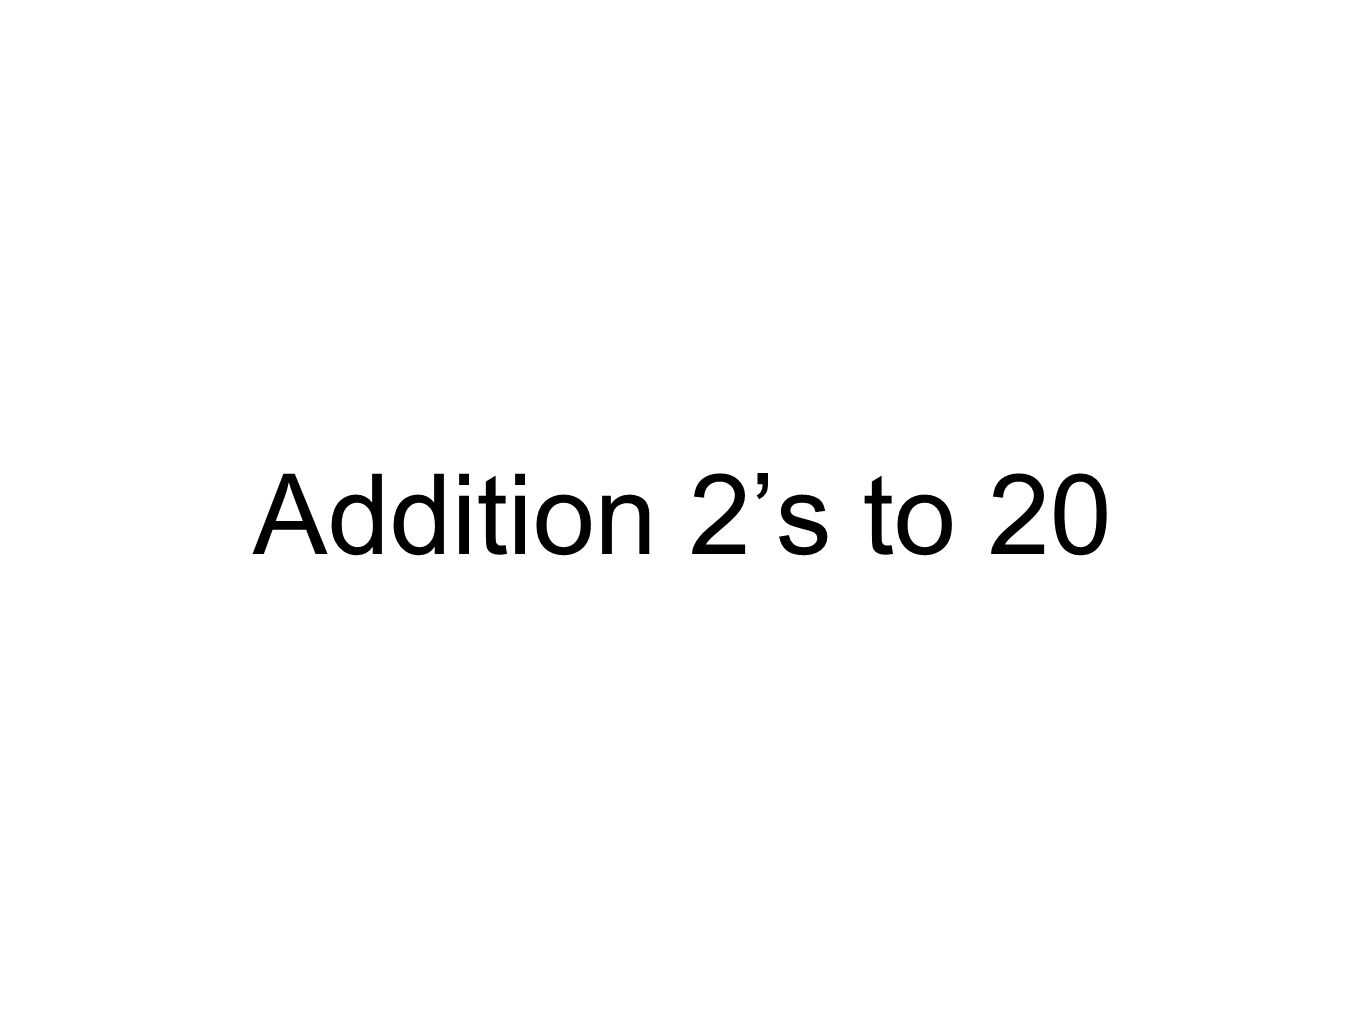 Addition 2’s to 20